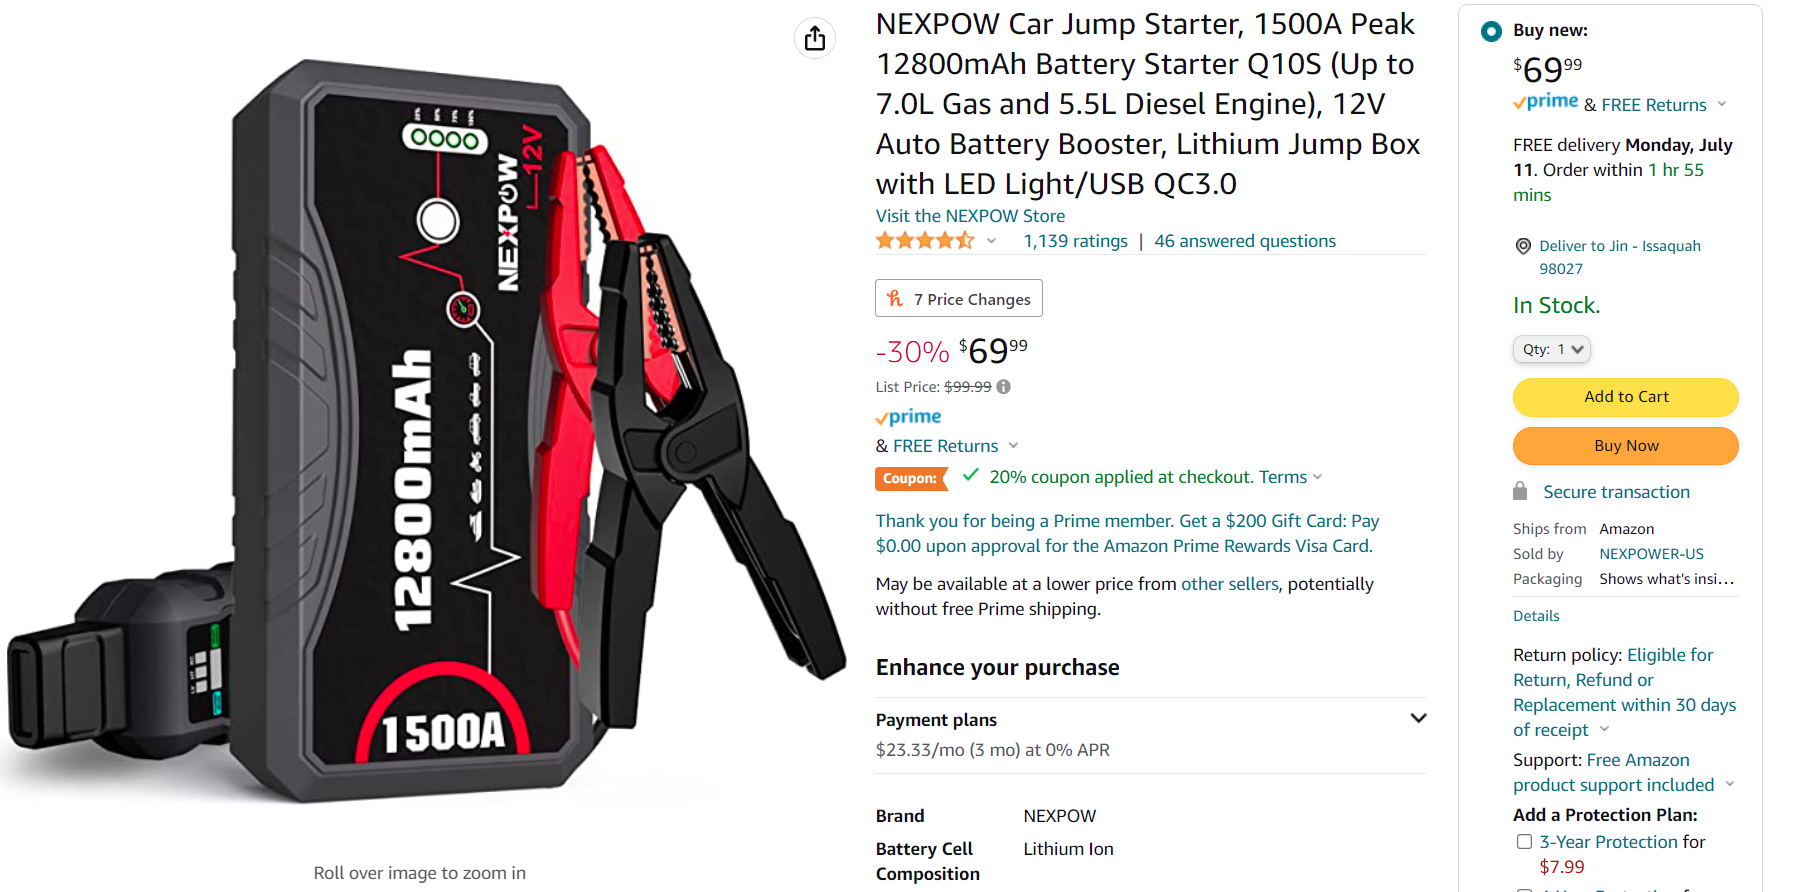 NEXPOW Car Jump Starter, 1500A Peak 12800mAh Battery Starter Q10S (Up to  7.0L Gas and 5.5L Diesel Engine), 12V Auto Battery Booster, Lithium Jump  Box with LED Light/USB QC3.0